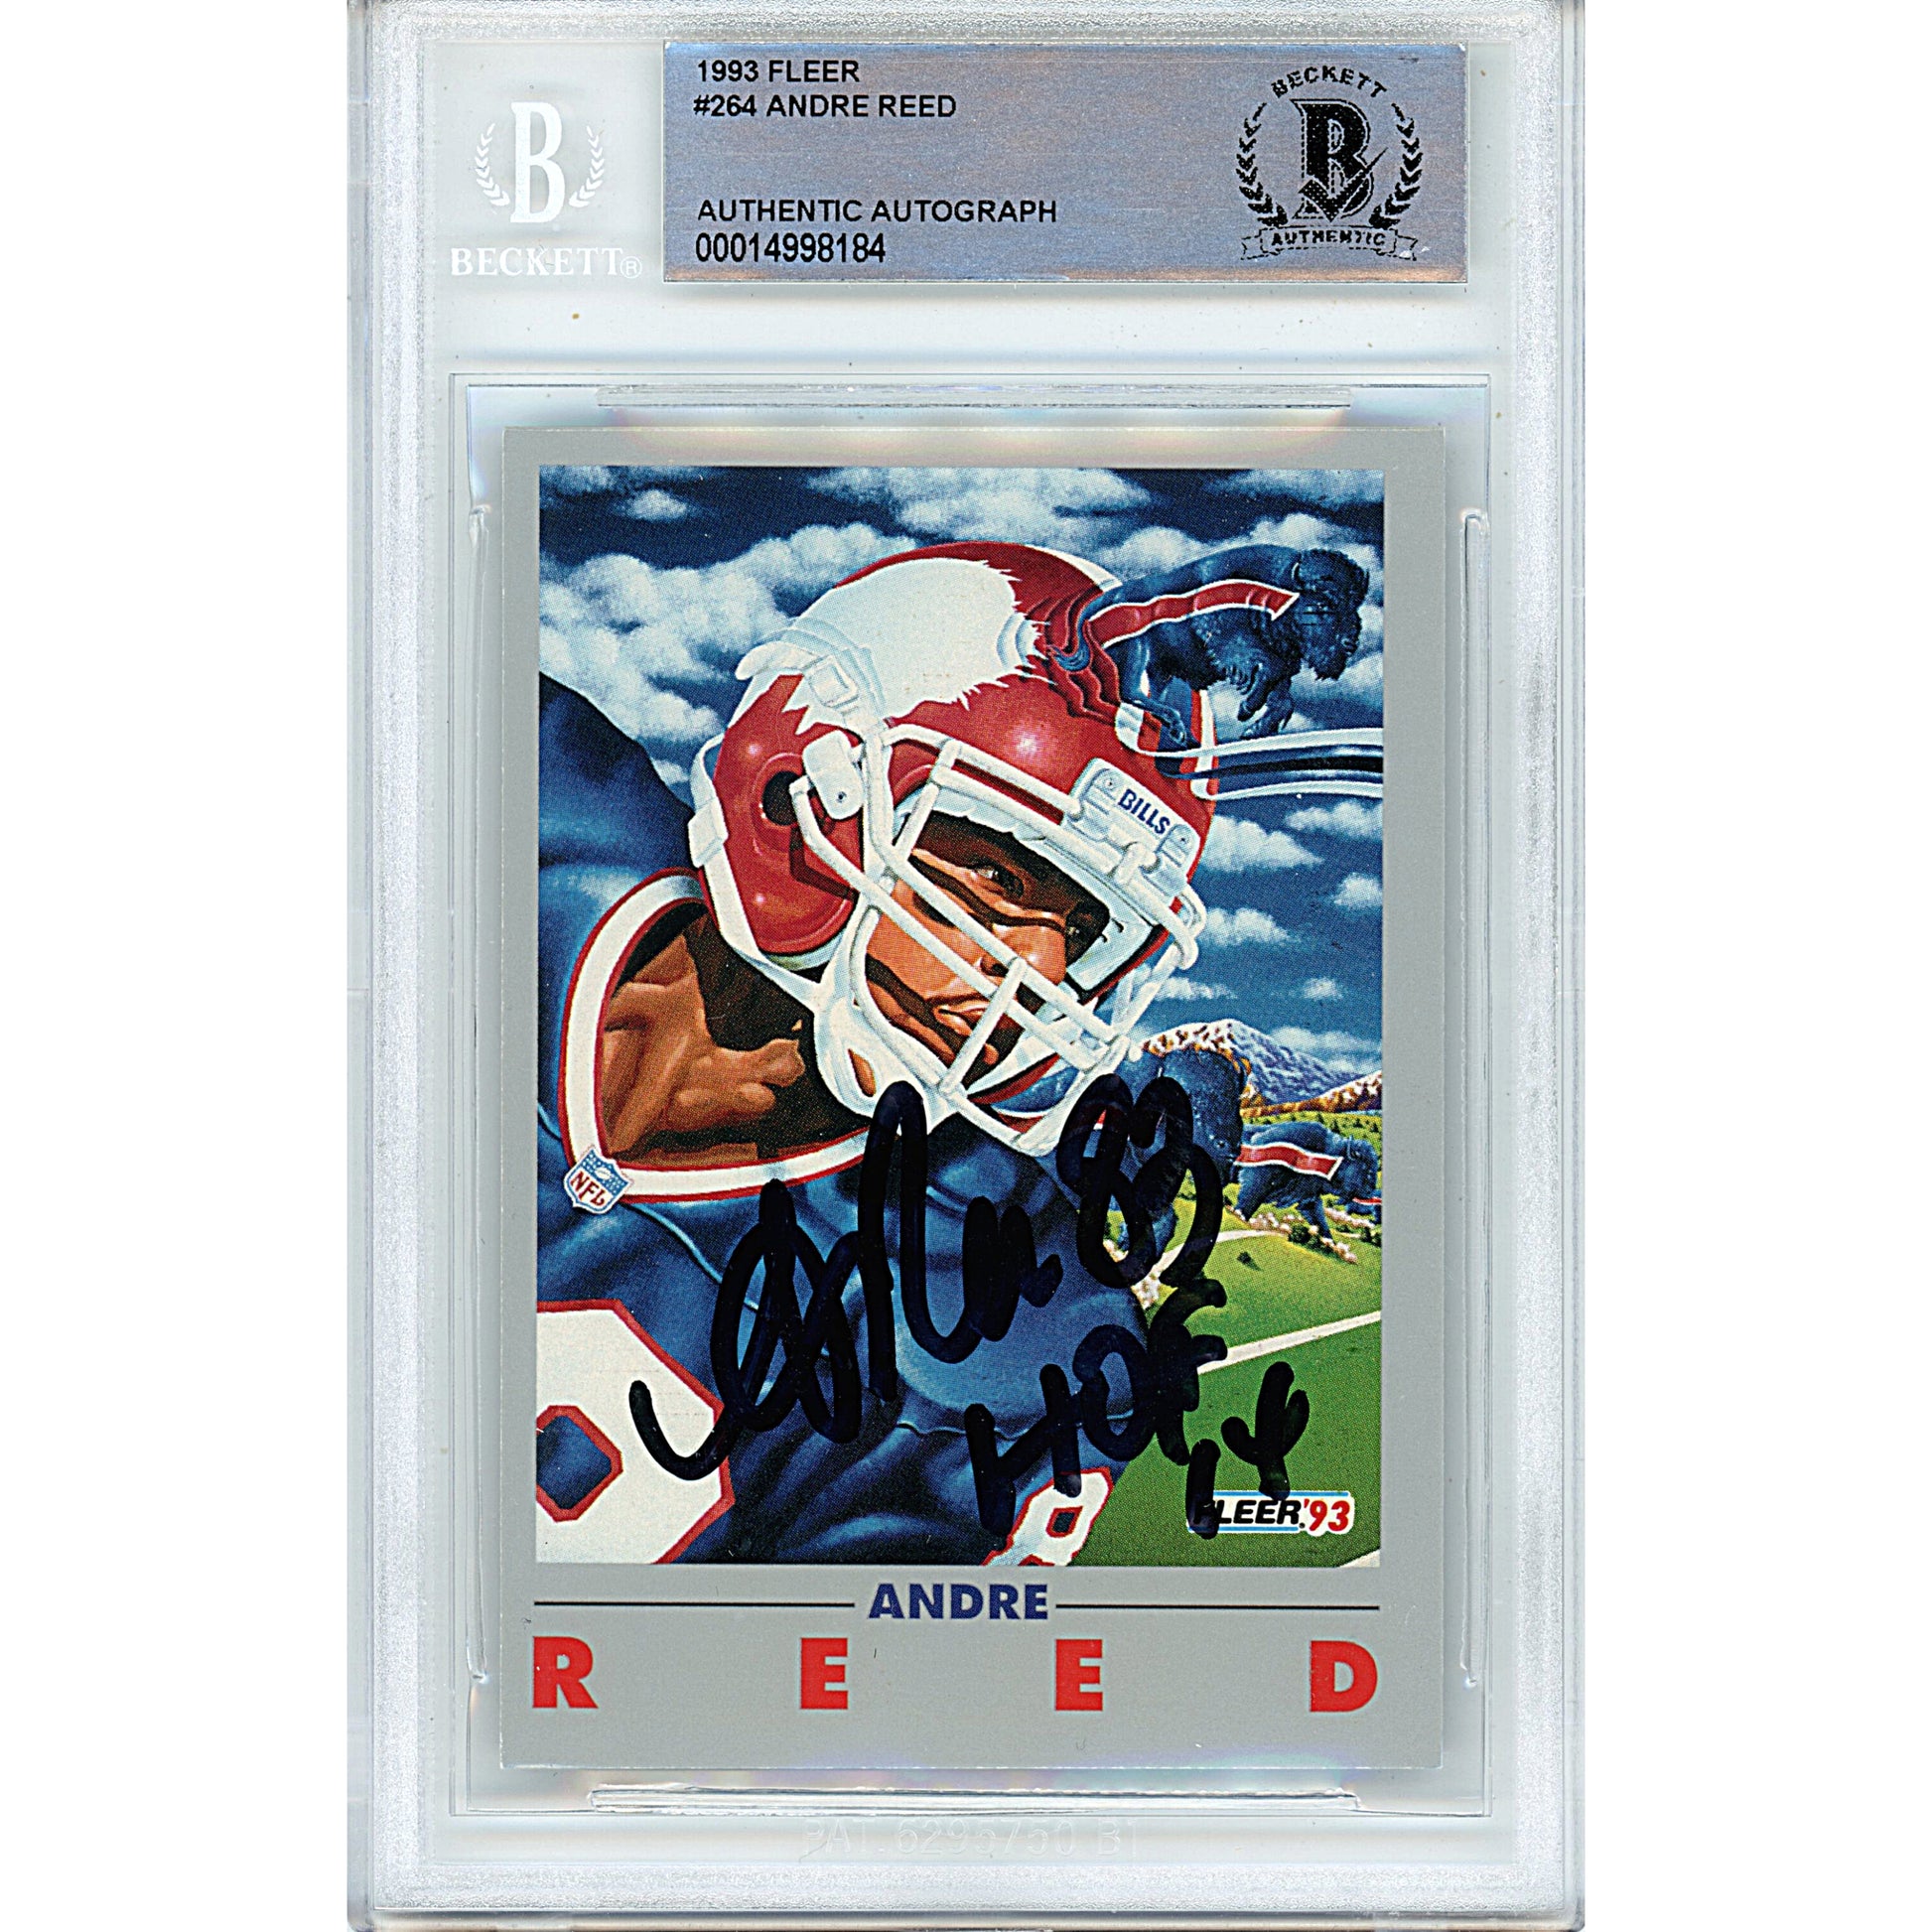 Football- Autographed- Andre Reed Signed 1993 Fleer Football Trading Card Beckett Authentication Slabbed 00014998184 - 101